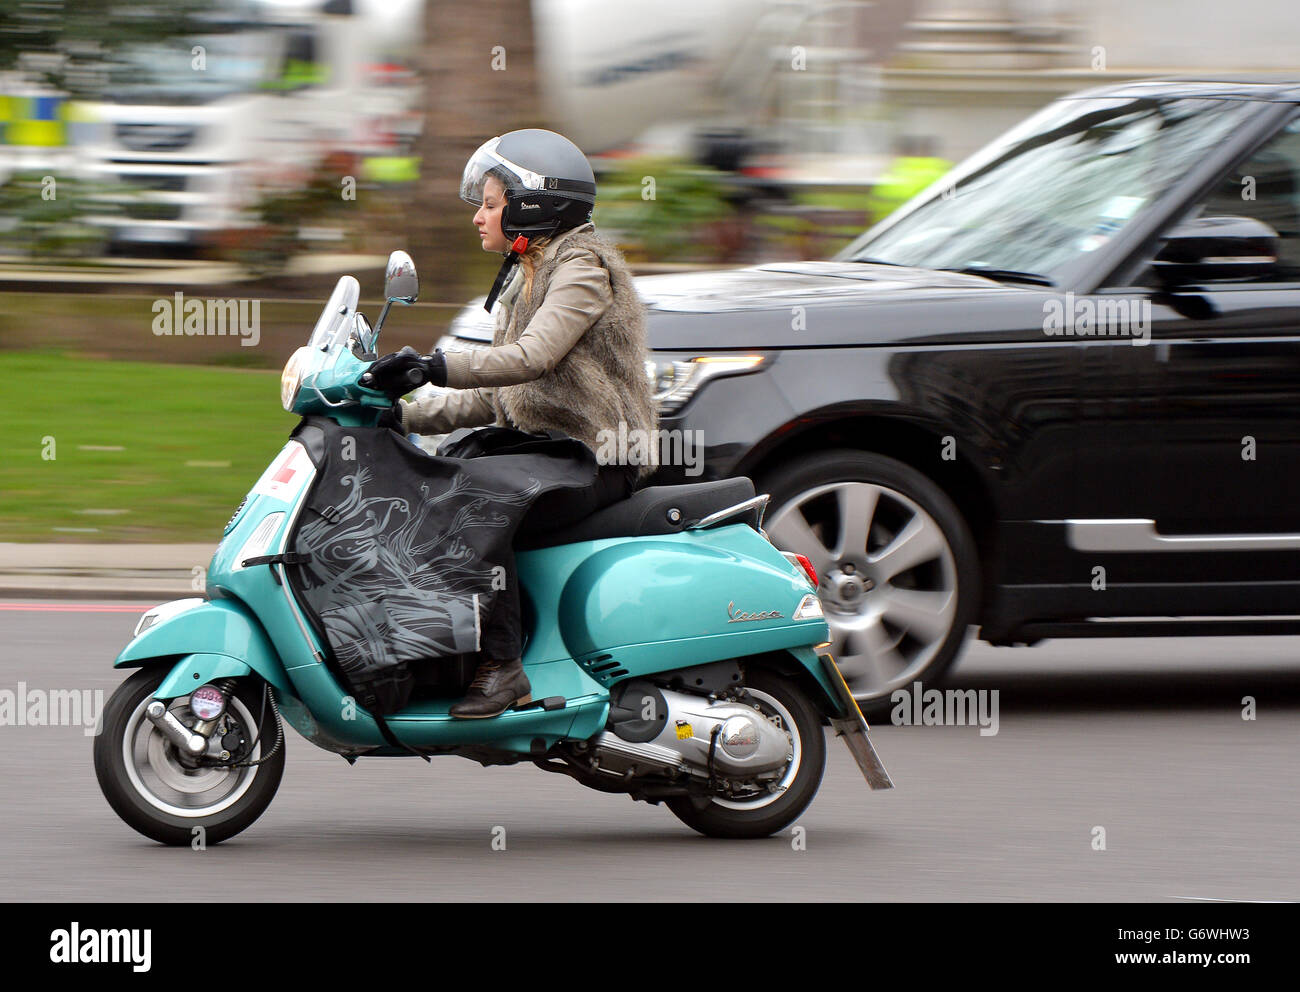 Cyclist stock. A motorcyclist on the London roads. Stock Photo